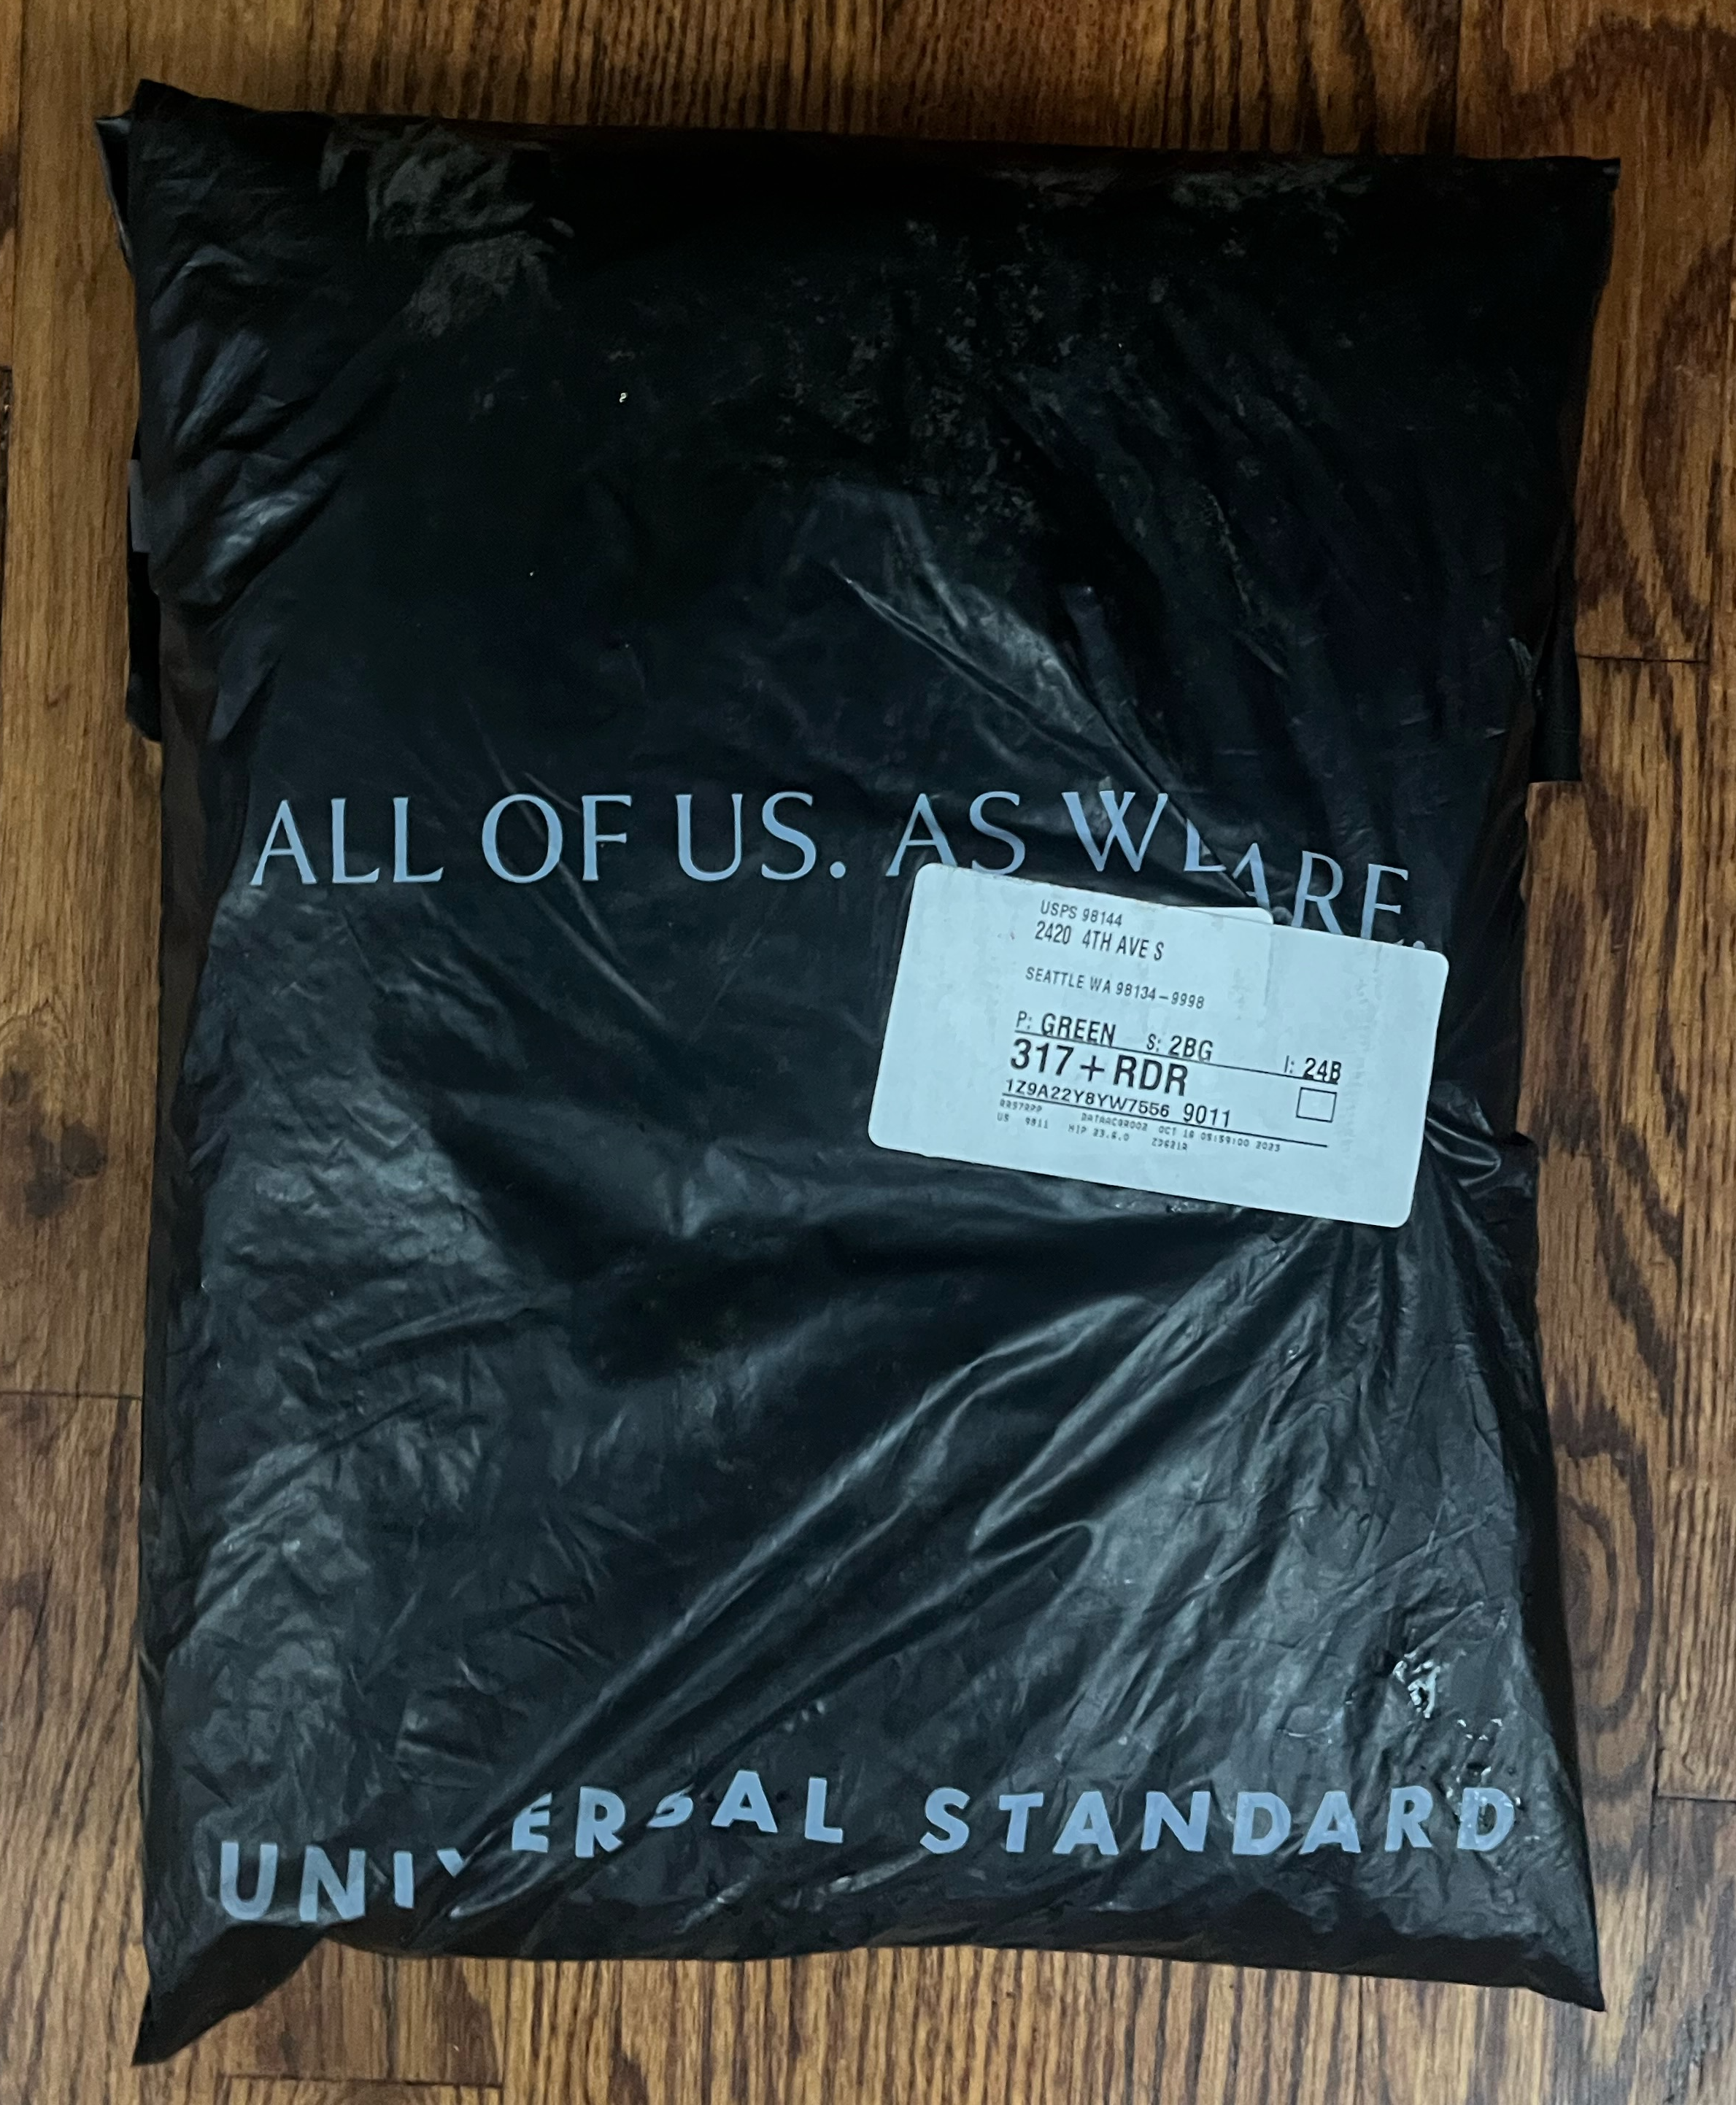 Universal Standard Mystery Box black bag packaging with three women's clothing items inside